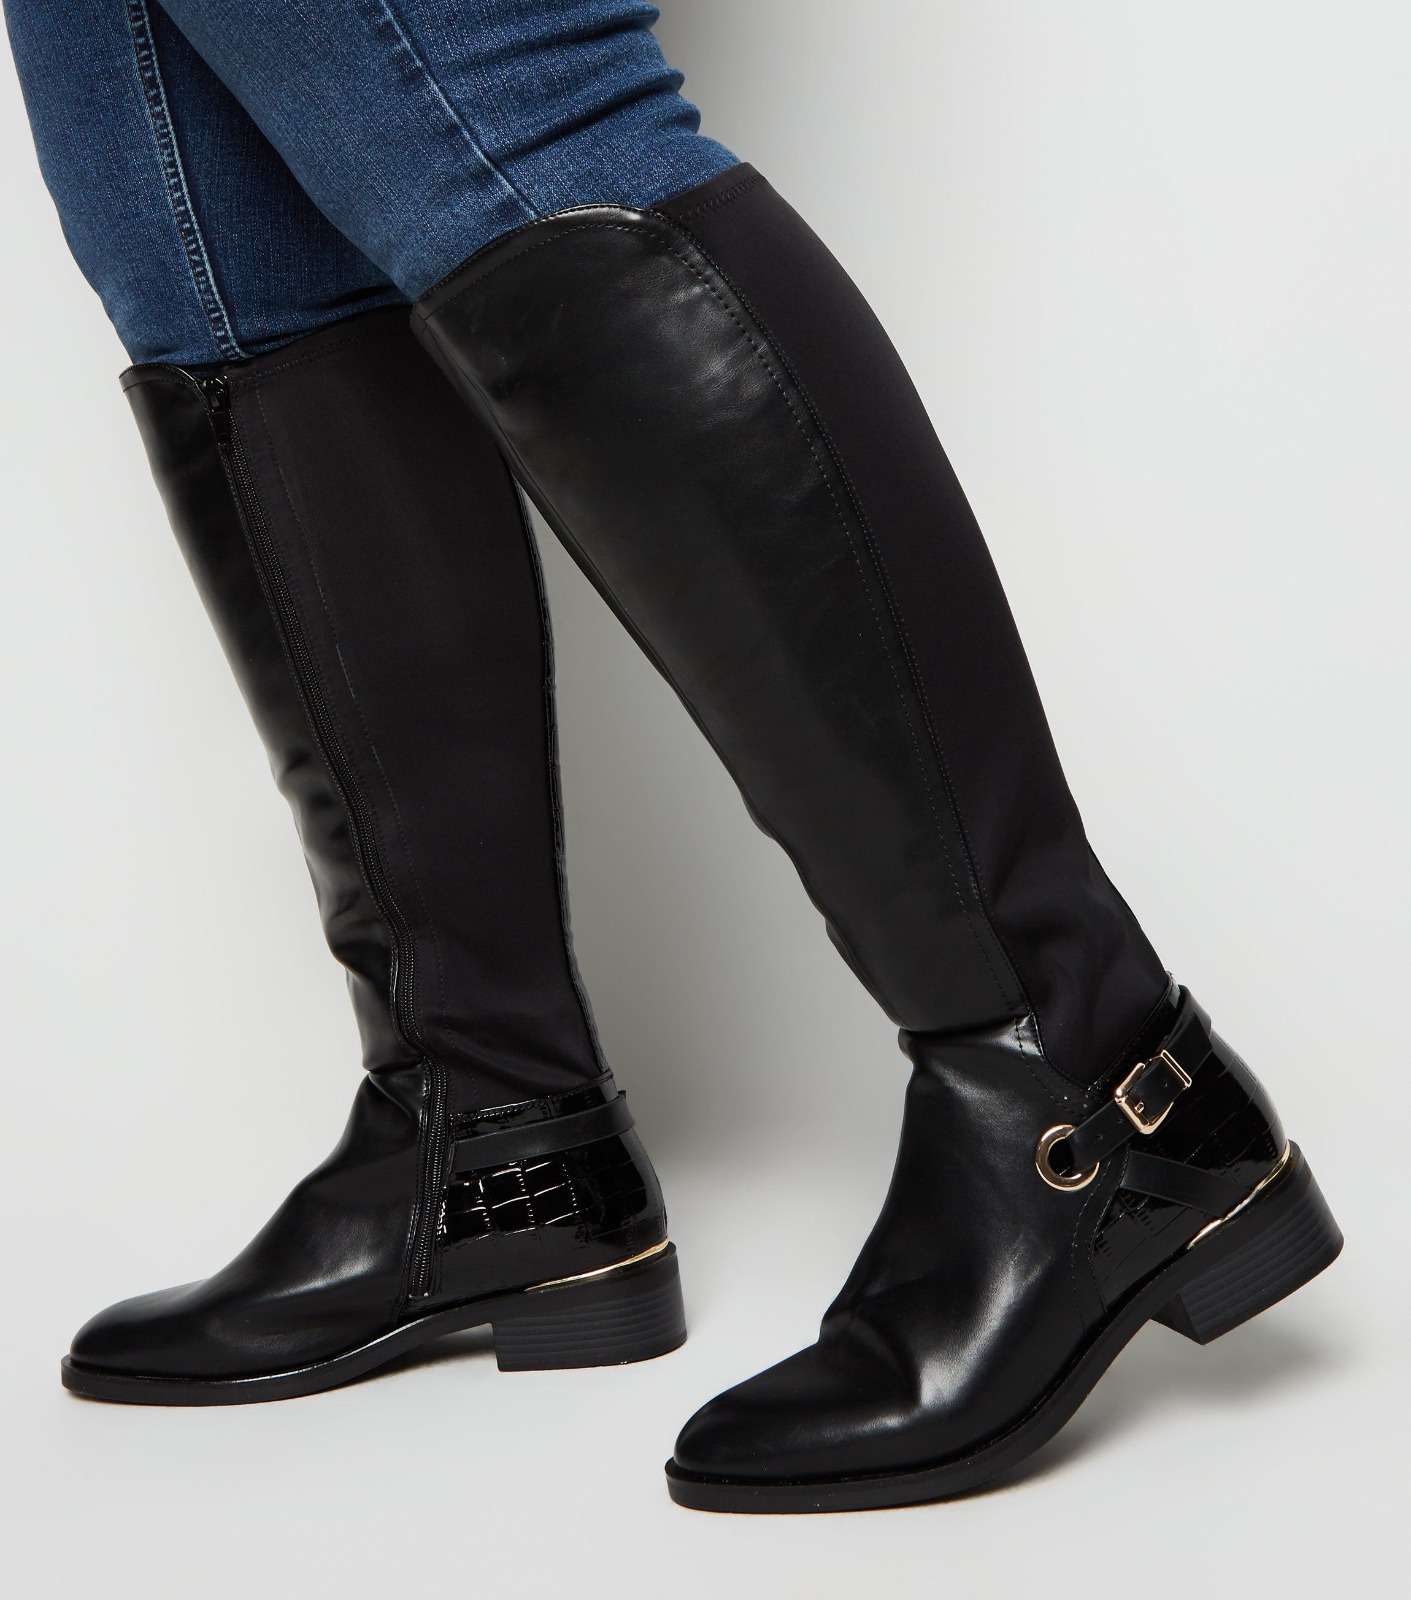 NEW LOOK Ladies Womens Black Flat Knee High Boots Calf Wide Fit Size 4 ...